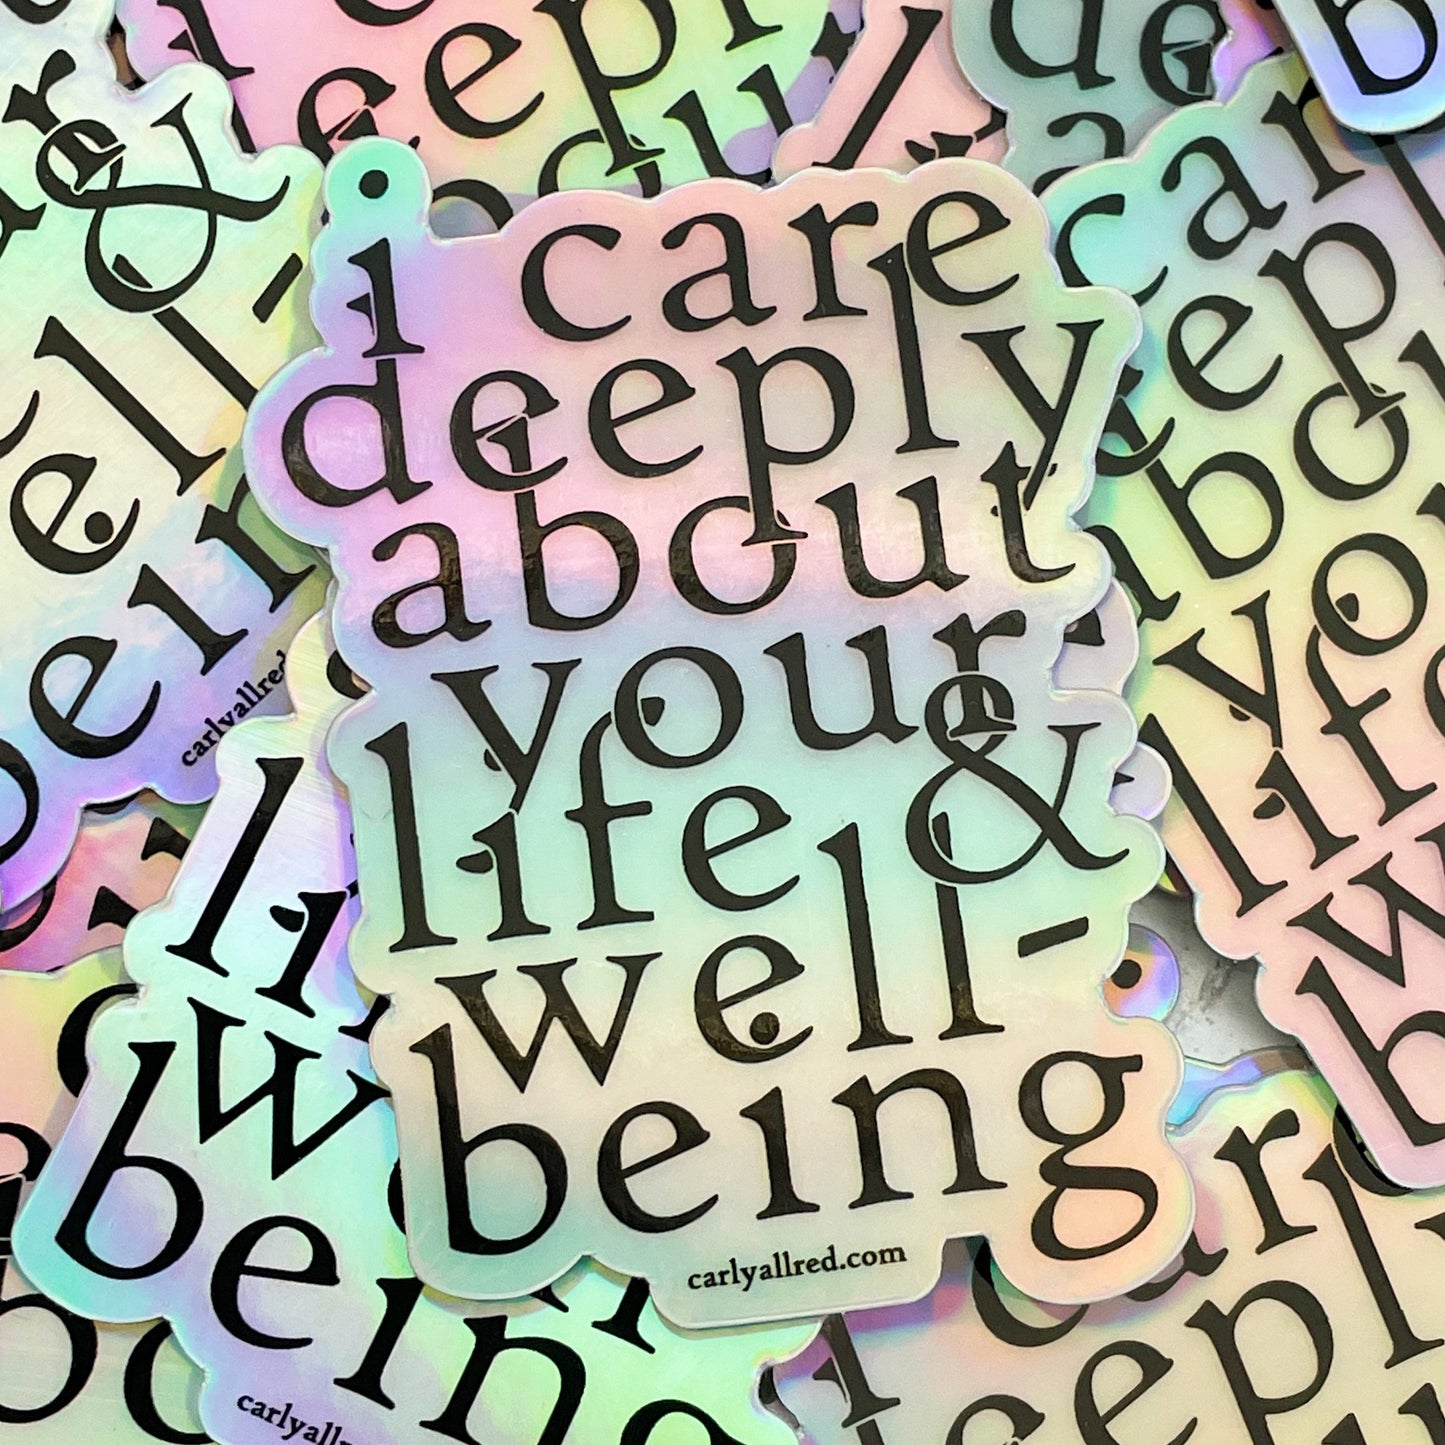 I Care Deeply About Your Life and Well-Being Holographic Sticker